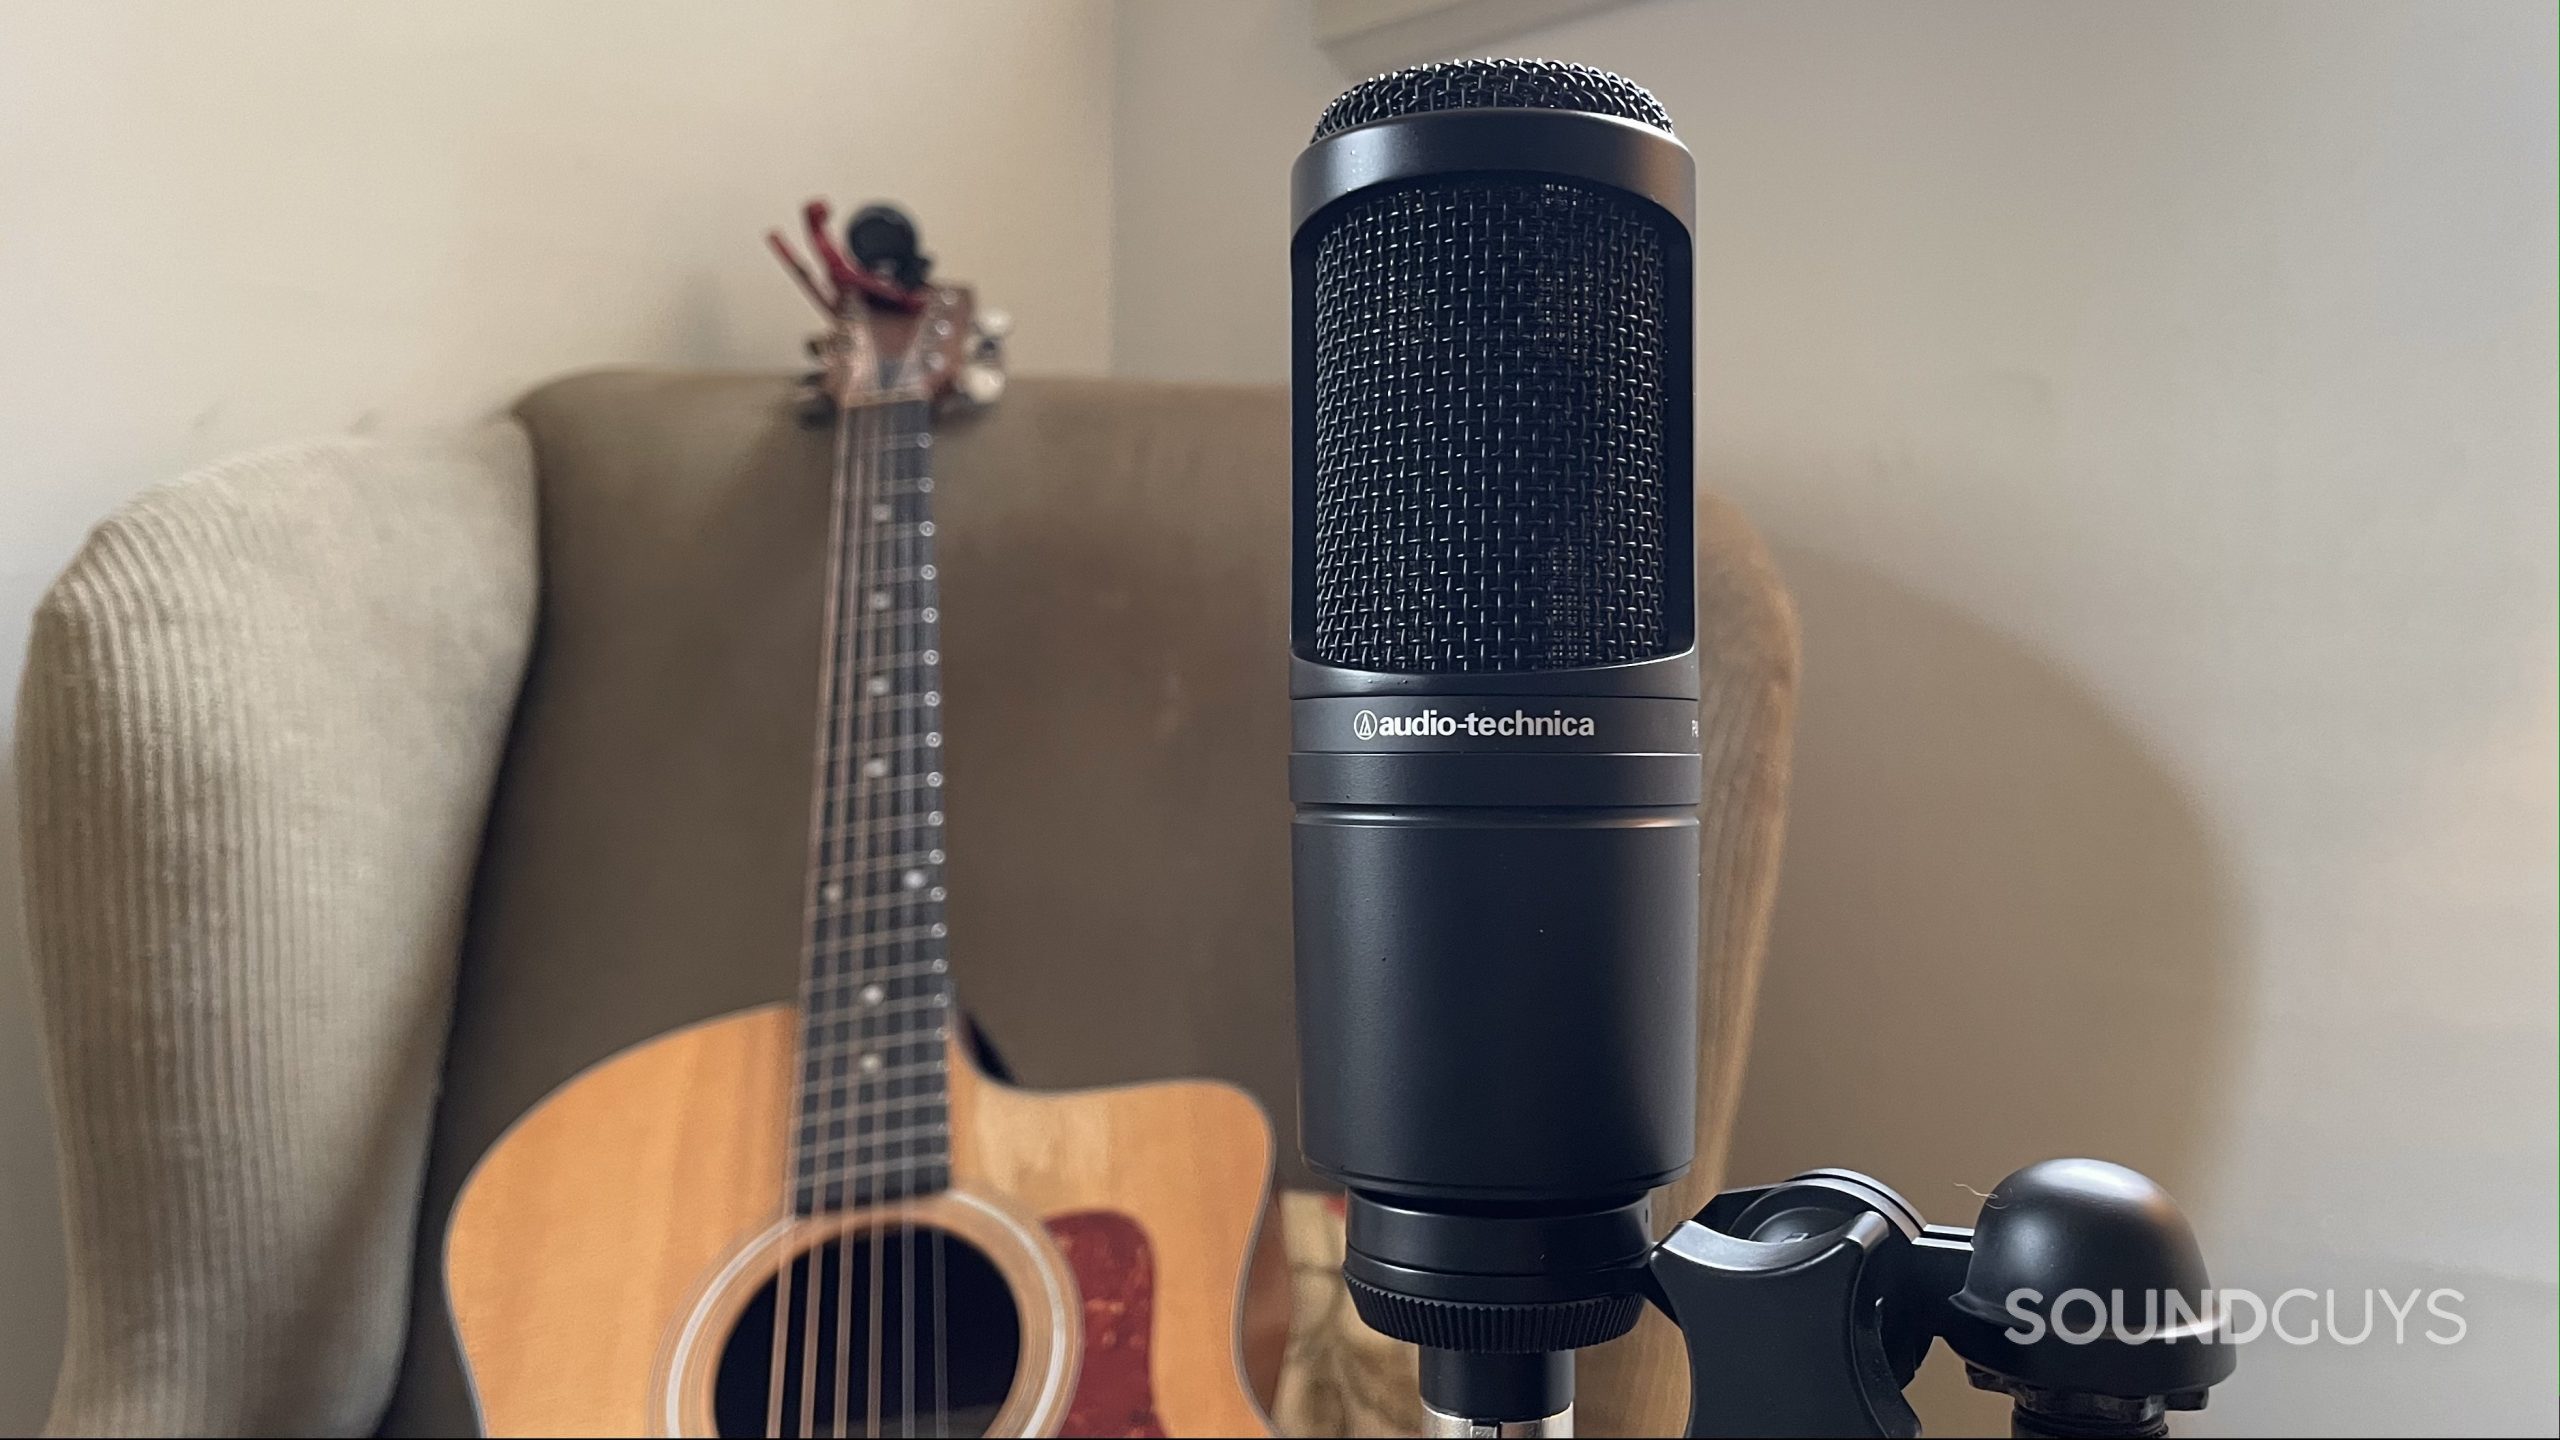 Audio-Technica AT2020 with an acoustic guitar resting on an armchair in the background.